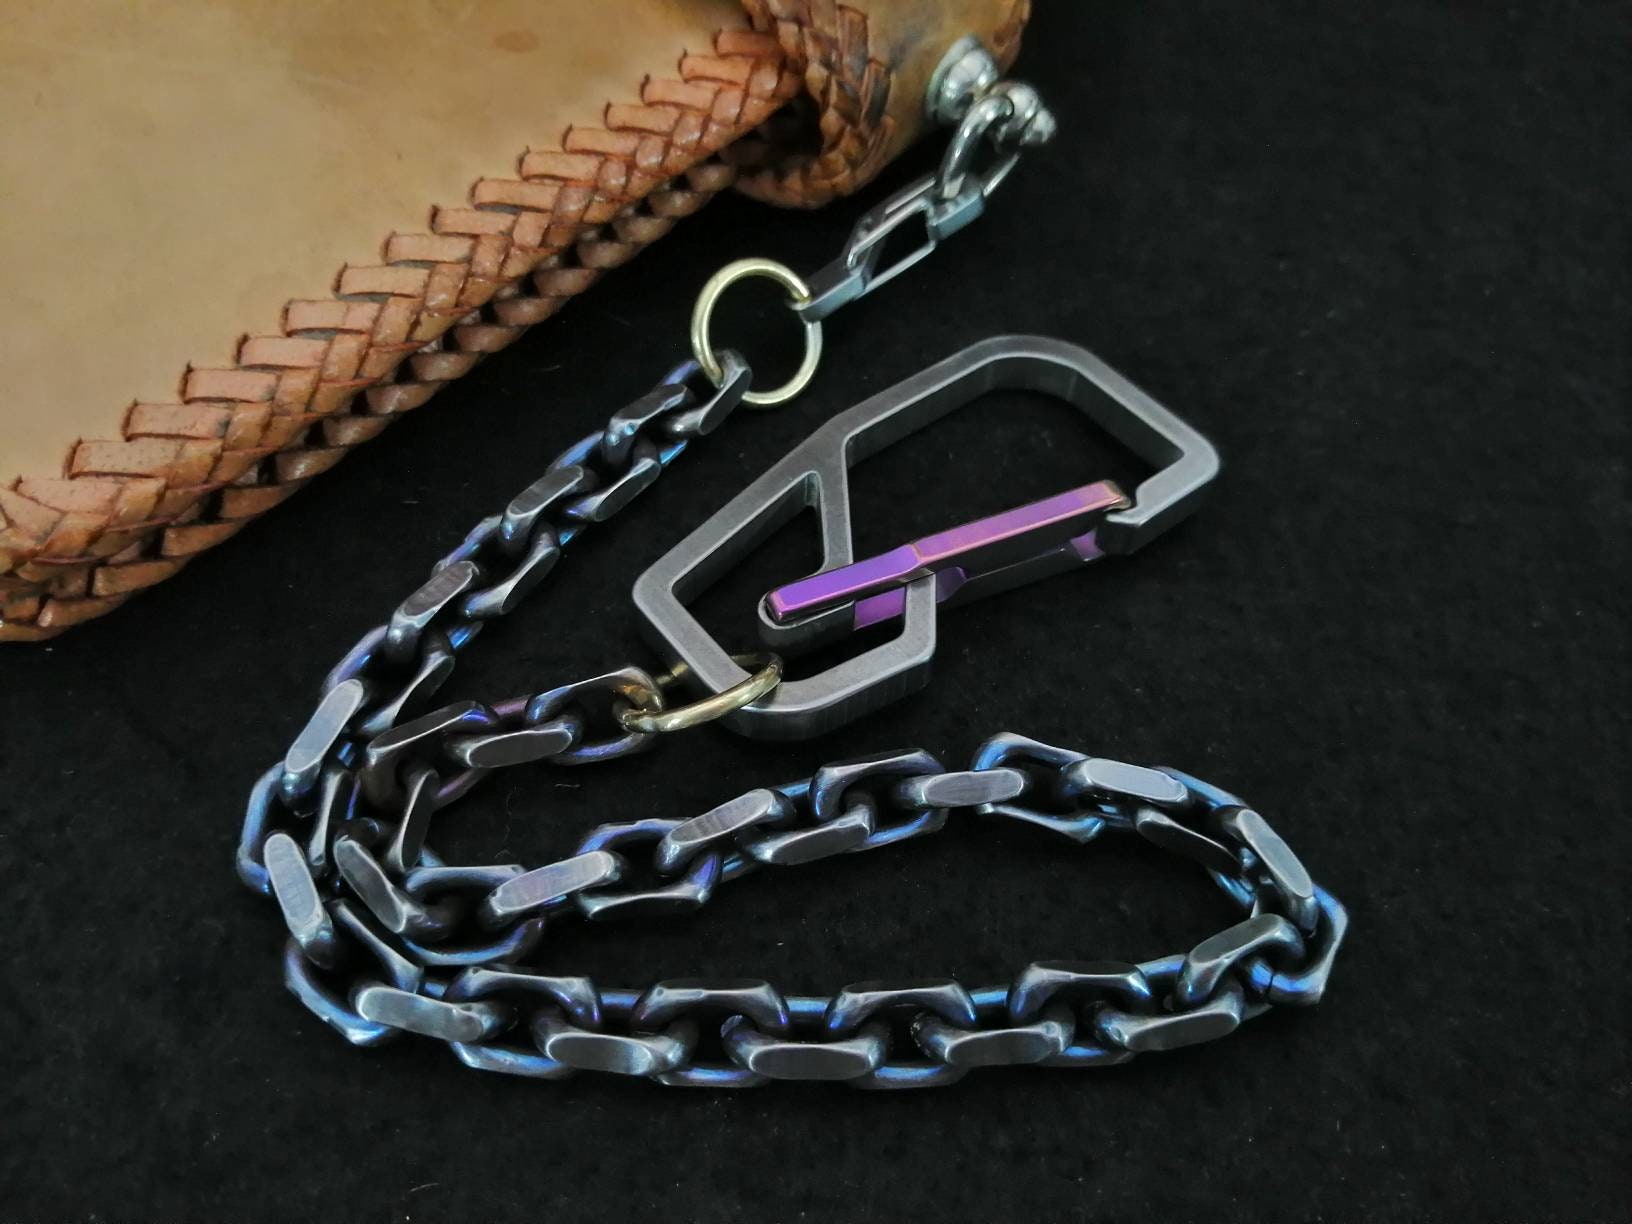 Wallet Chain - Classic Links